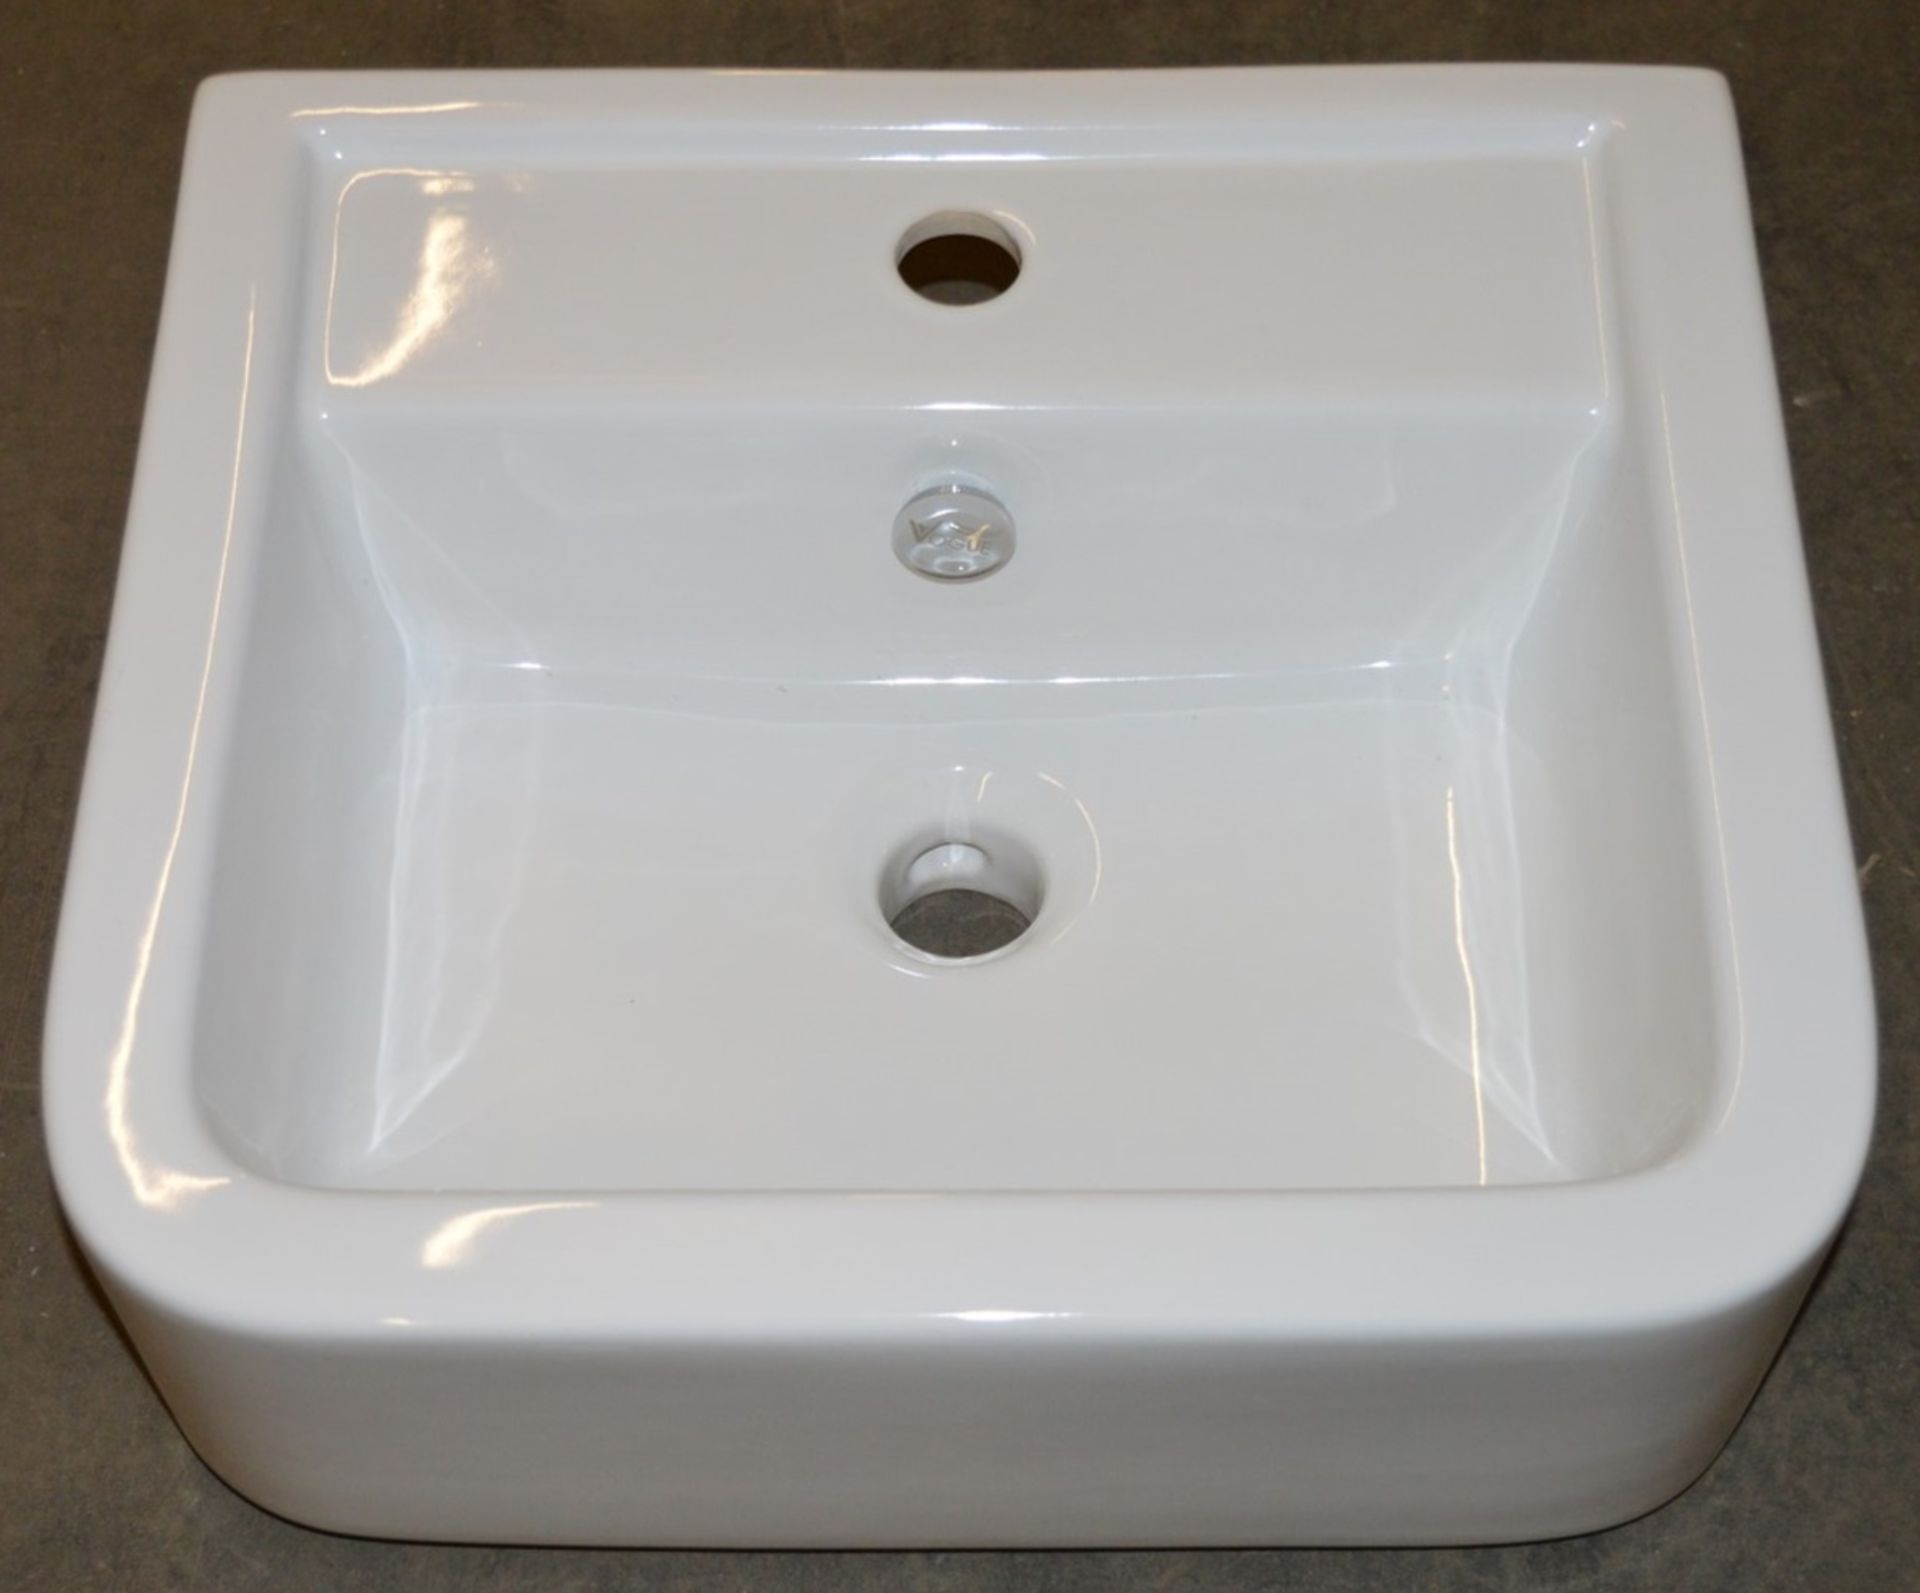 4 x Vogue Bathrooms OPTIONS Single Tap Hole SEMI RECESSED SINK BASIN - 450mm Width - Brand New Boxed - Image 3 of 3